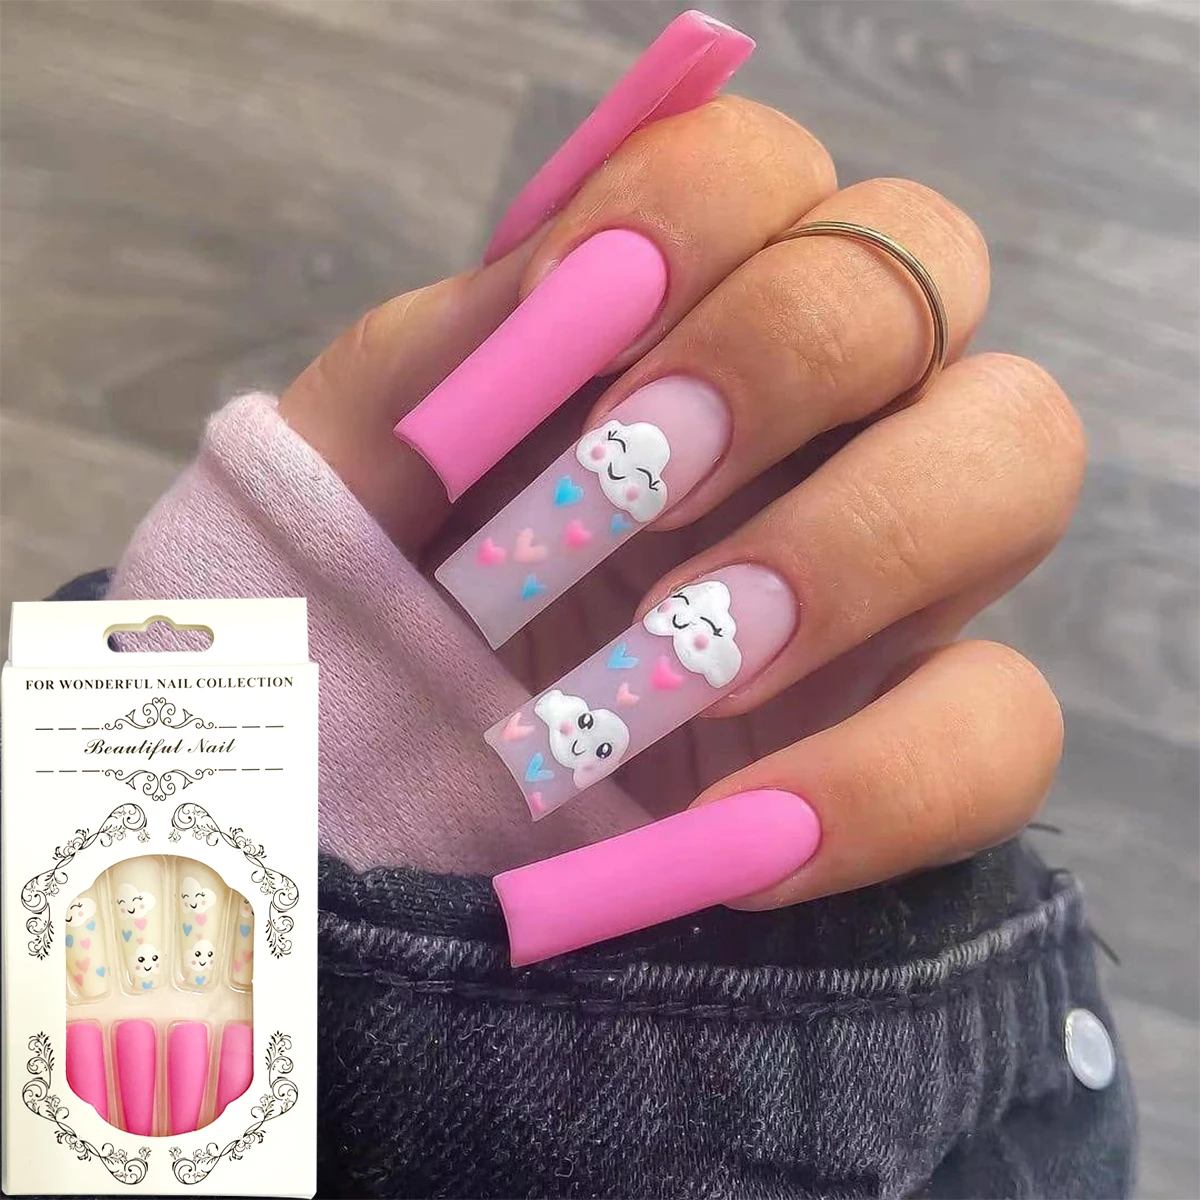 

24pcs Stiletto Ballerina Fake Nail Long Cloud Smiley Full Cover Tips Coffin Press on Art Acrylic Decal with Glue False Nails